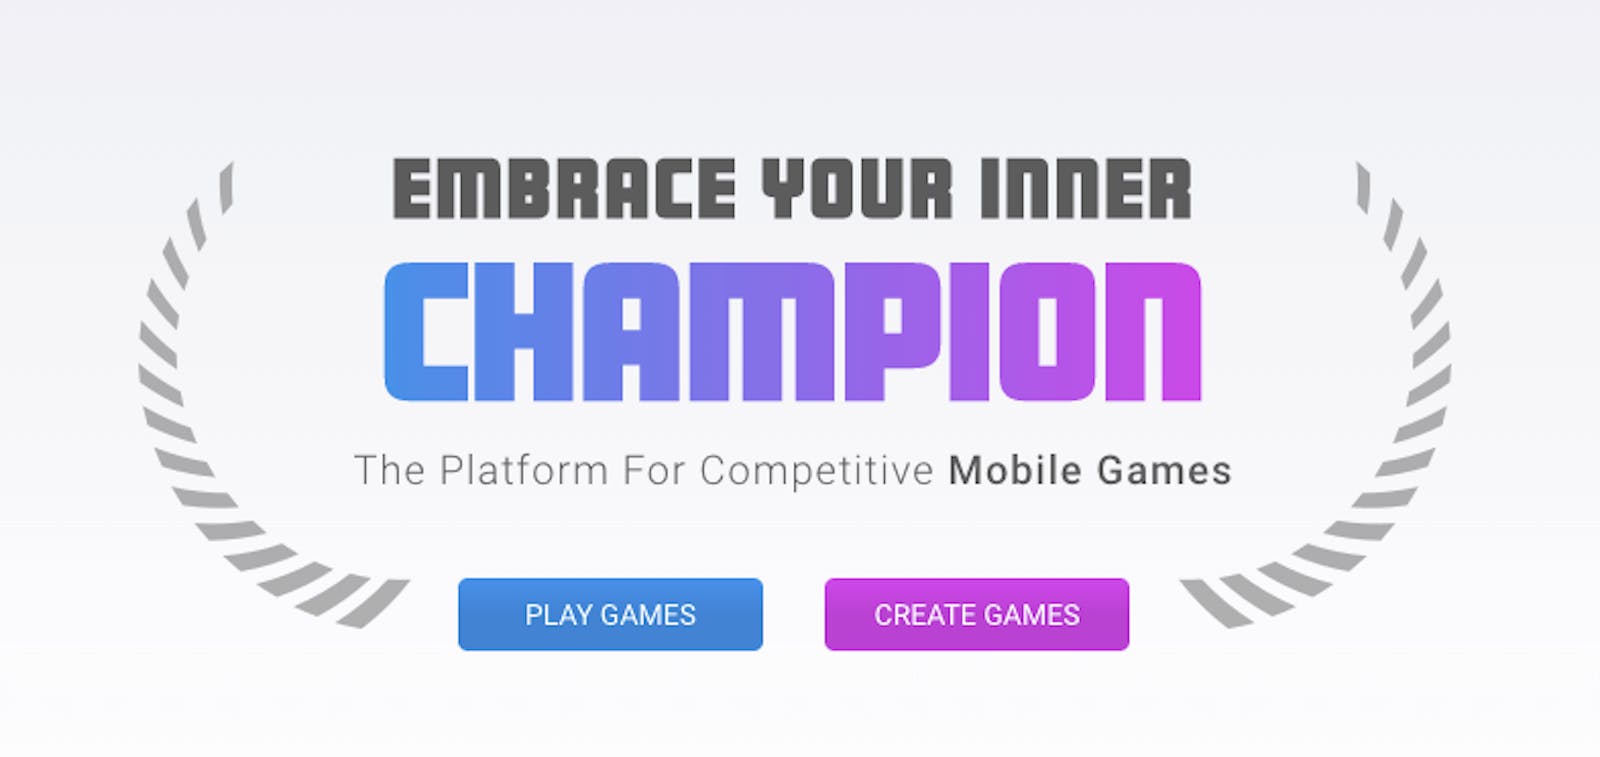 The platform for competitive mobile games